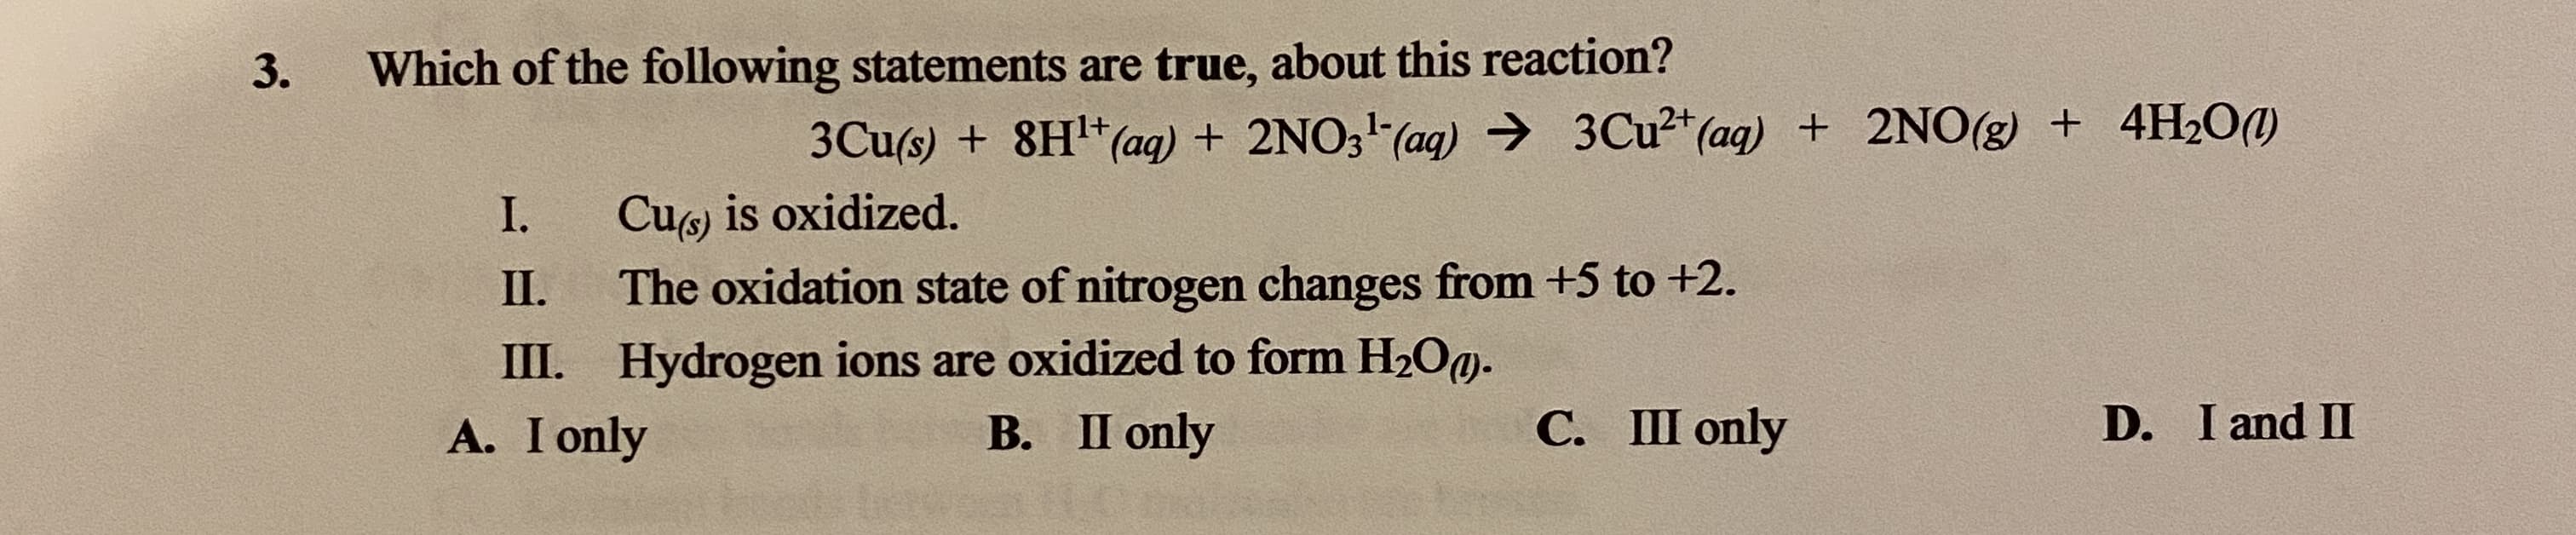 Which of the following statements are true, about this reaction?
3Cu(s) + 8H*(ag) + 2NO3 (ag) → 3CU²*(ag) + 2NO(g) + 4H2O(1)
Cu) is oxidized.
The oxidation state of nitrogen changes from +5 to +2.
I.
II.
III. Hydrogen ions are oxidized to form H2OO-
A. I only
В. П only
С. Ш only
D. I and II
